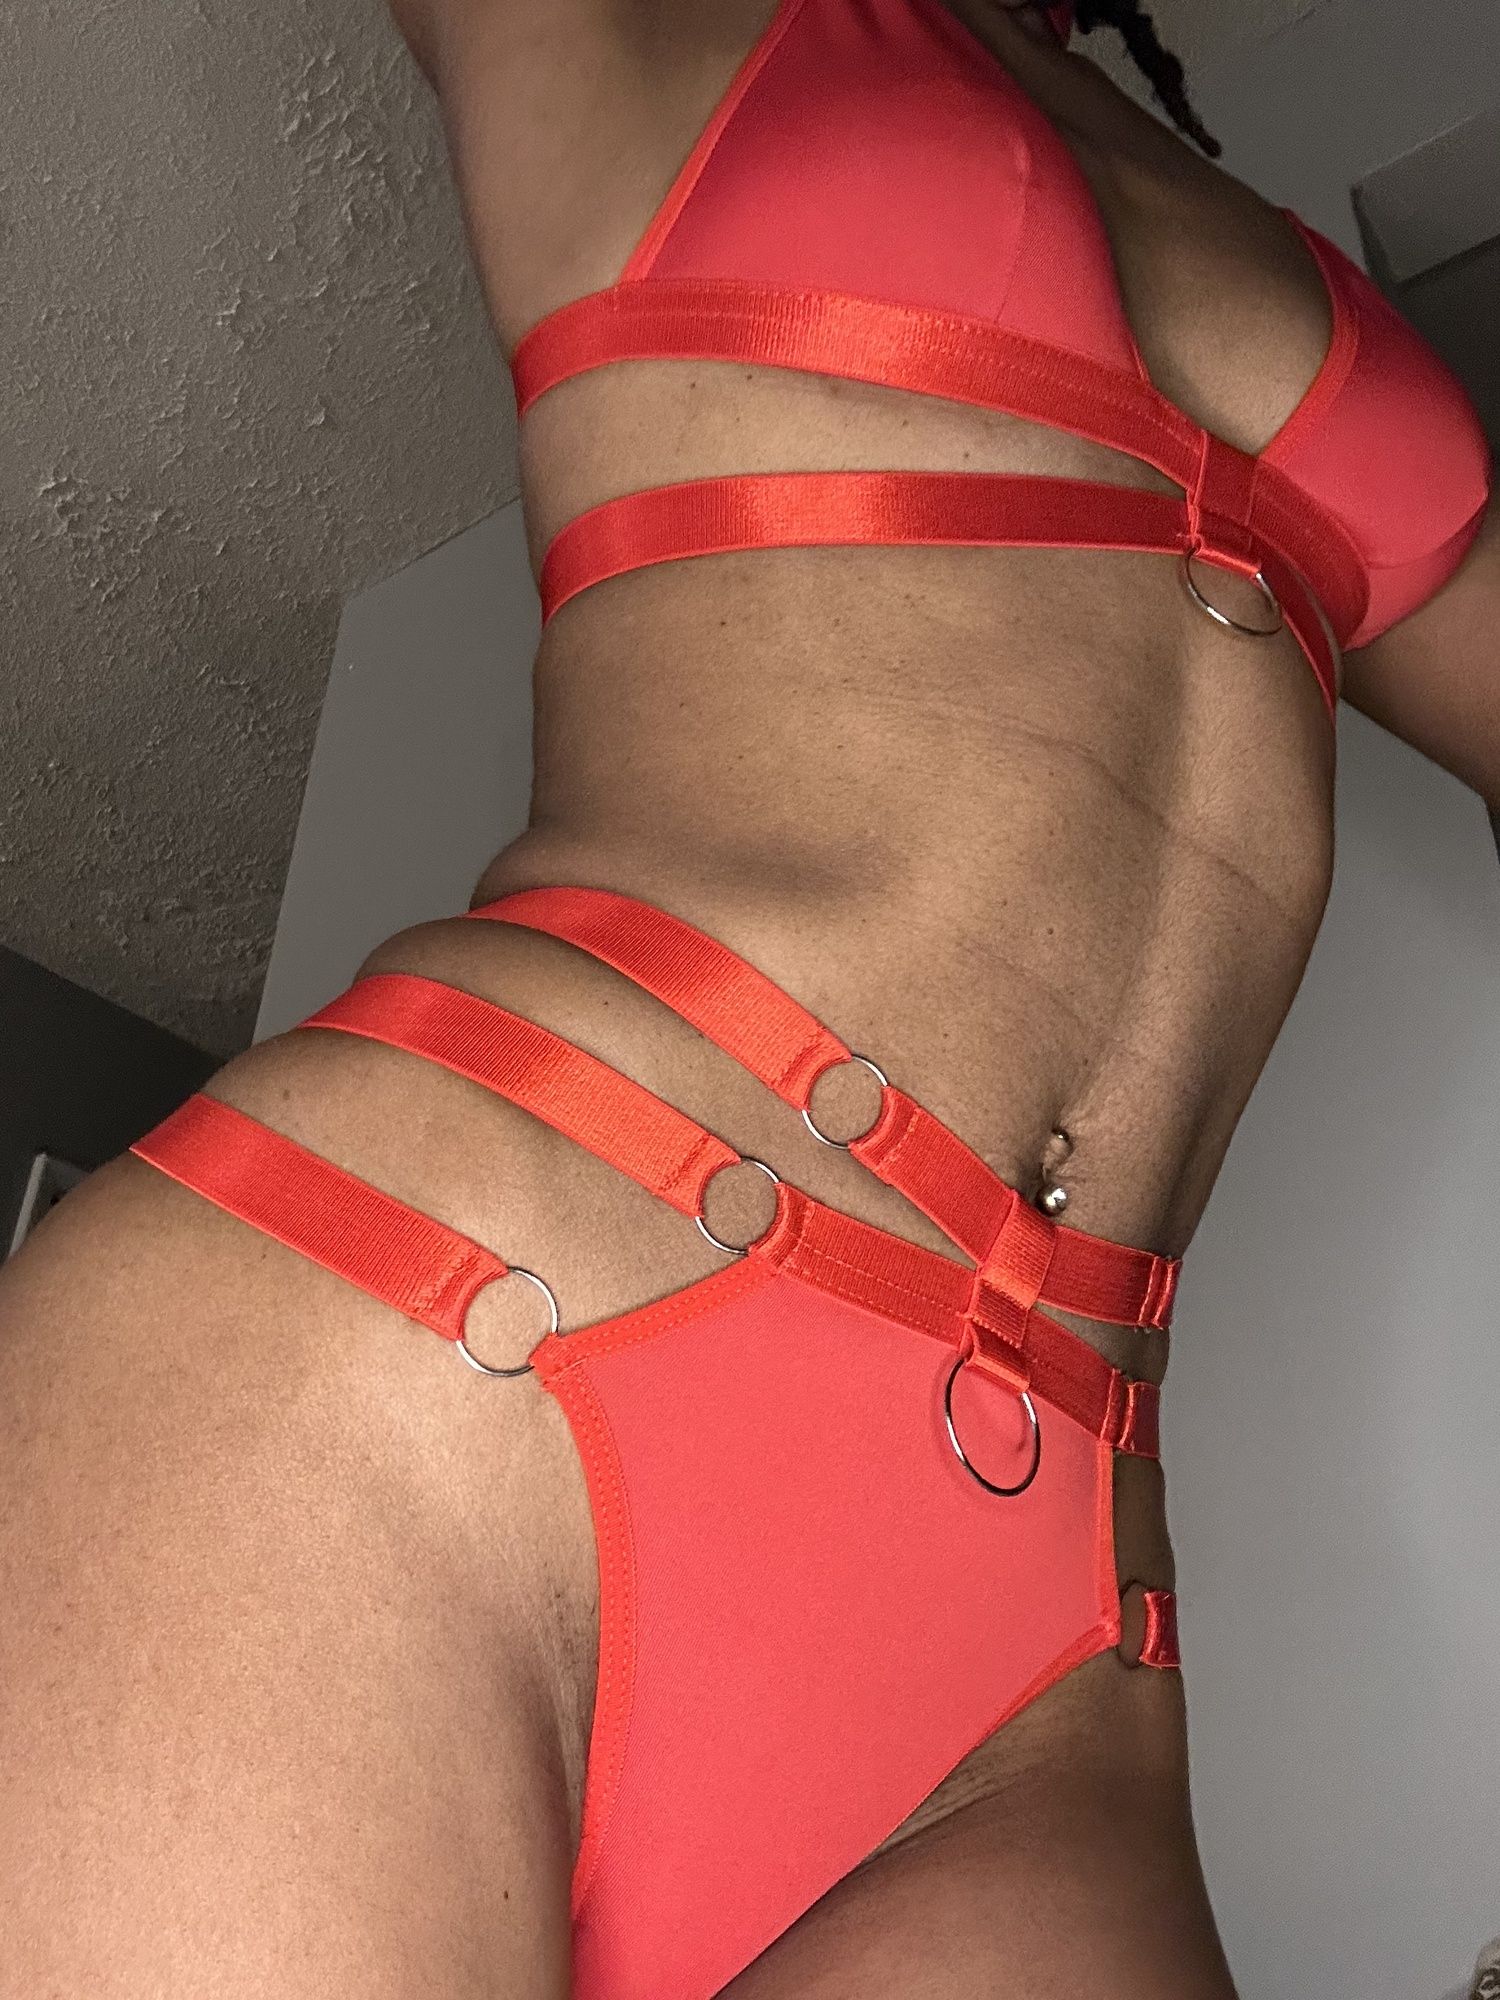 Skinny Ebony with Small Ass and Tits in Red Lingerie  #2